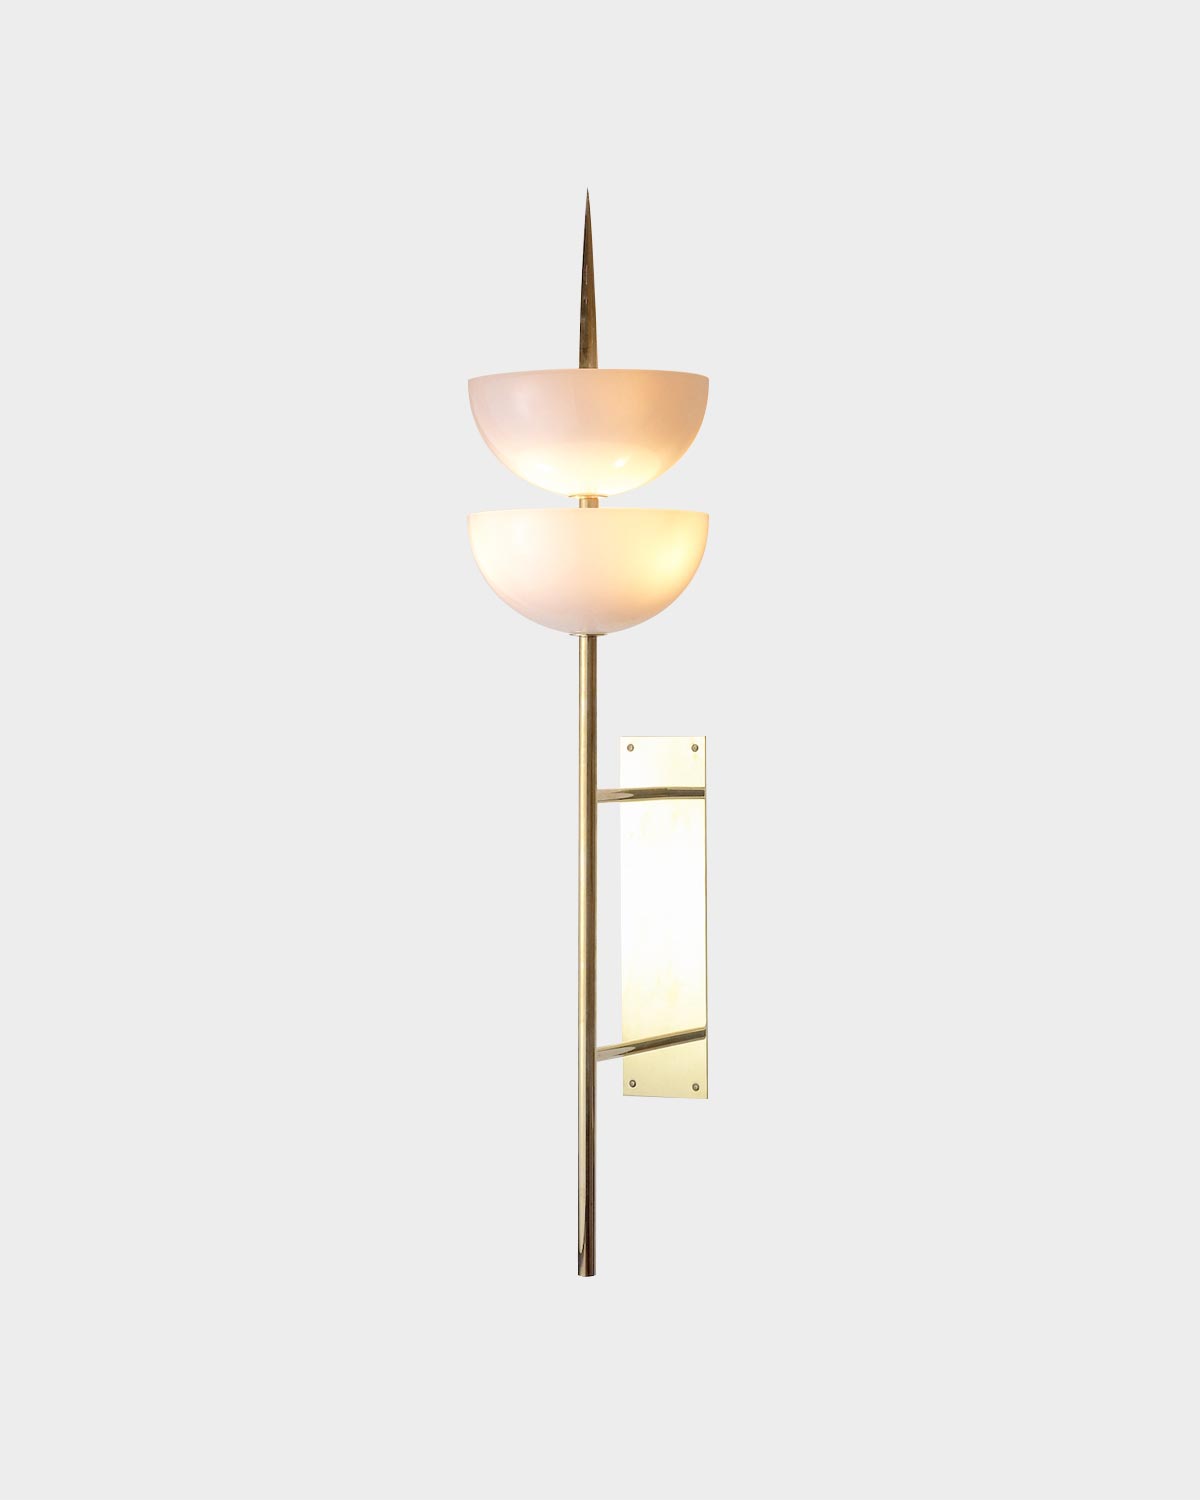 The Gilles Grand Scaled Wall Sconce by Studio Van den Akker